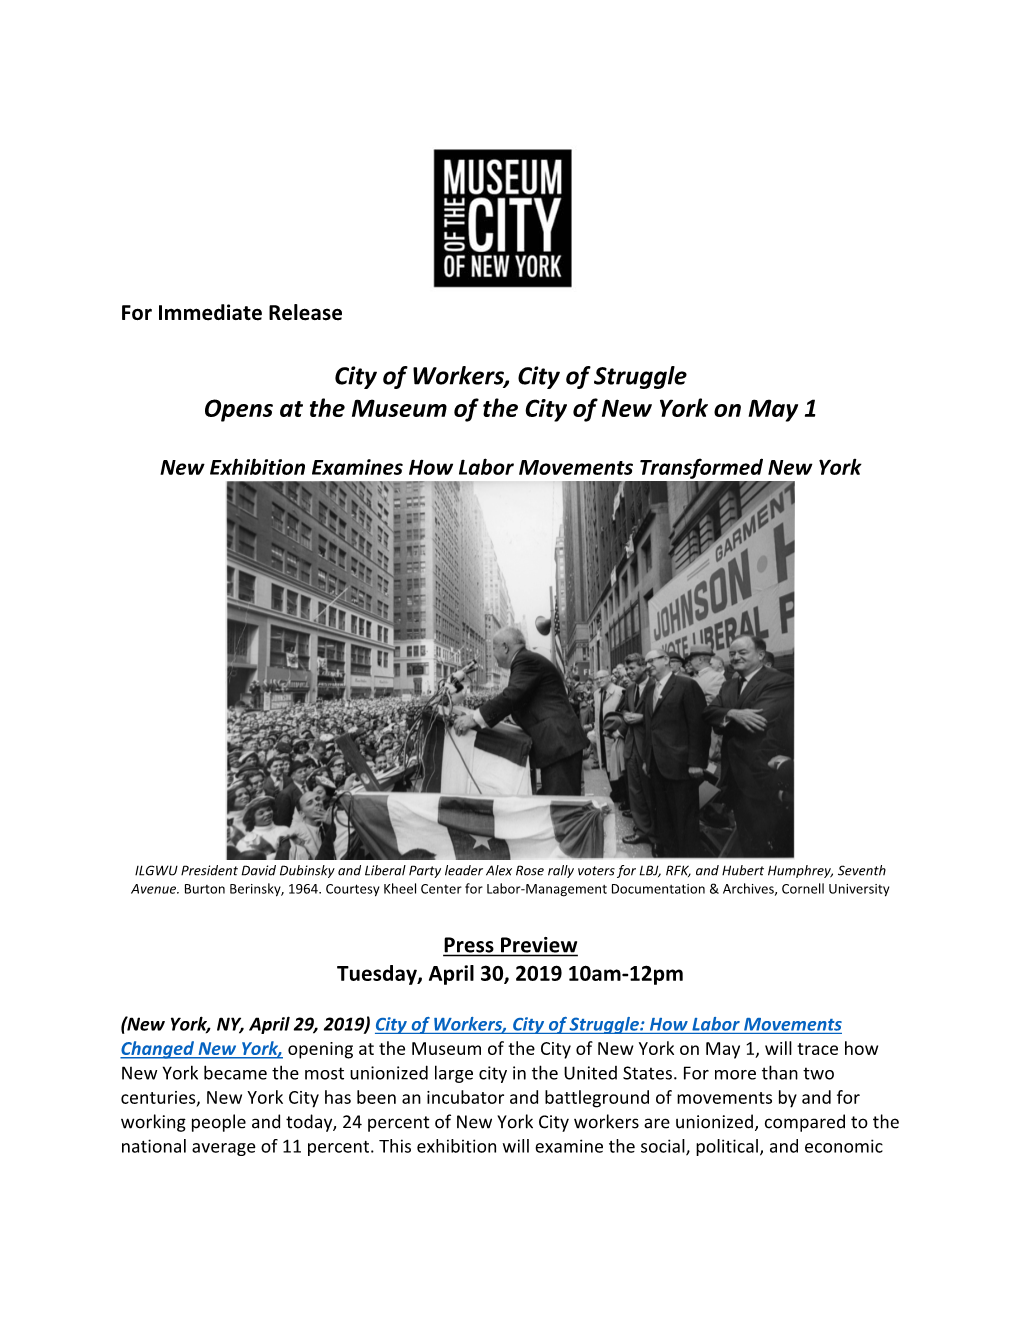 City of Workers, City of Struggle Opens at the Museum of the City of New York on May 1